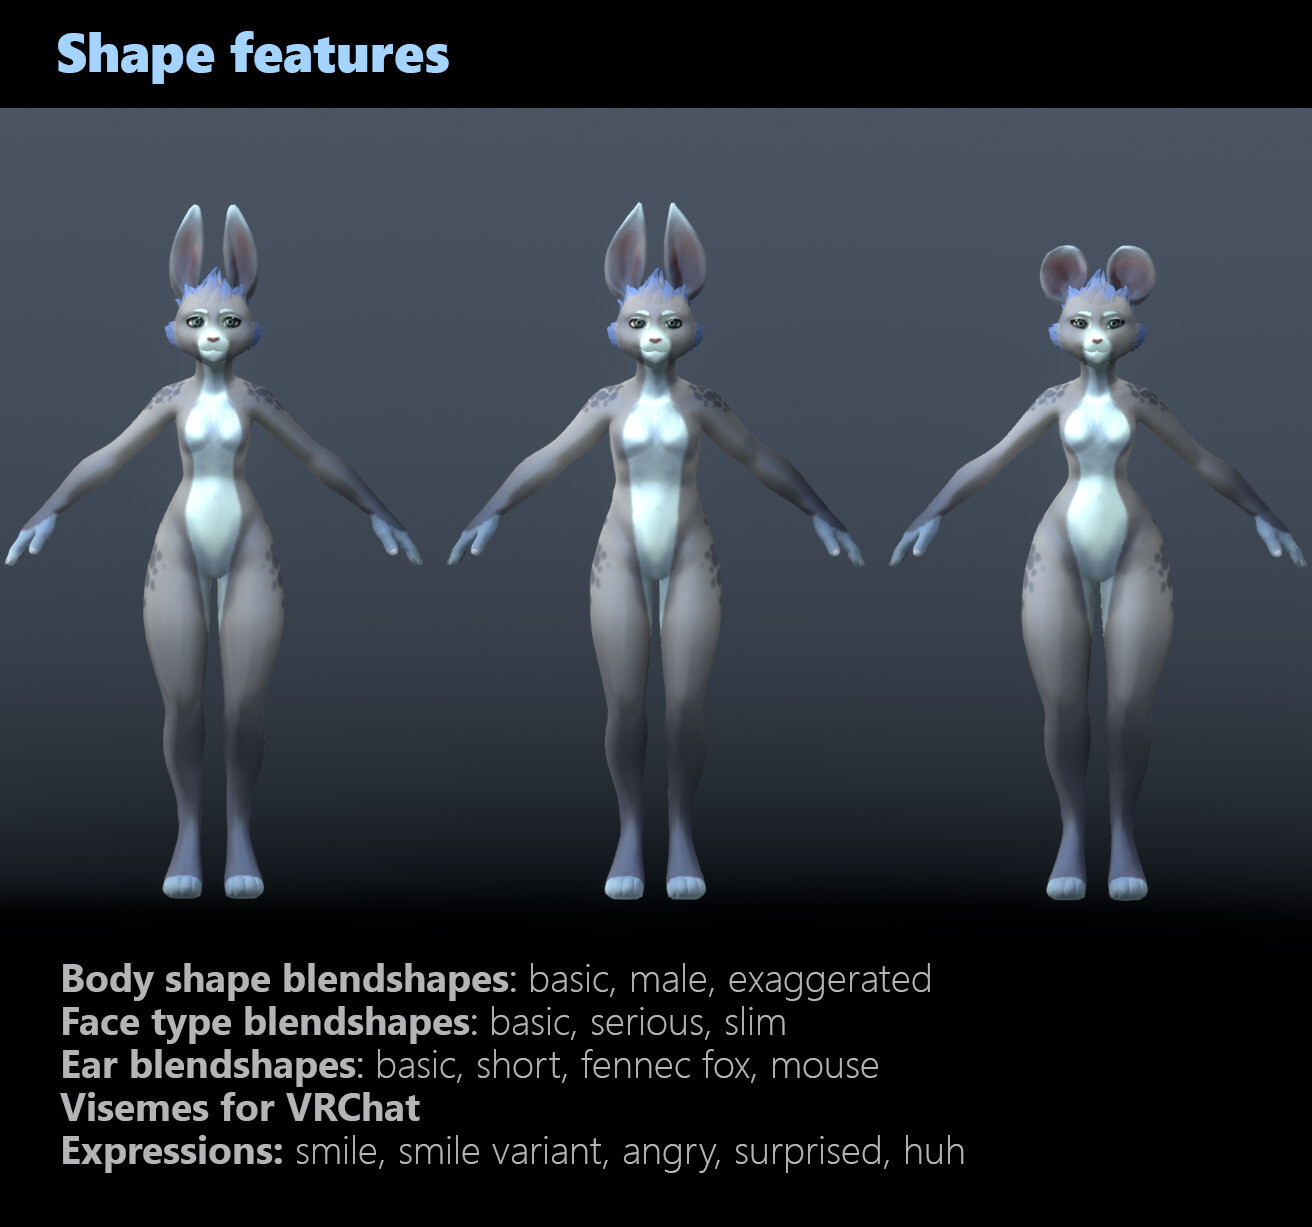 Users can play with the blendshapes in Unity in order to customize their avatar further without any need to use external tools.